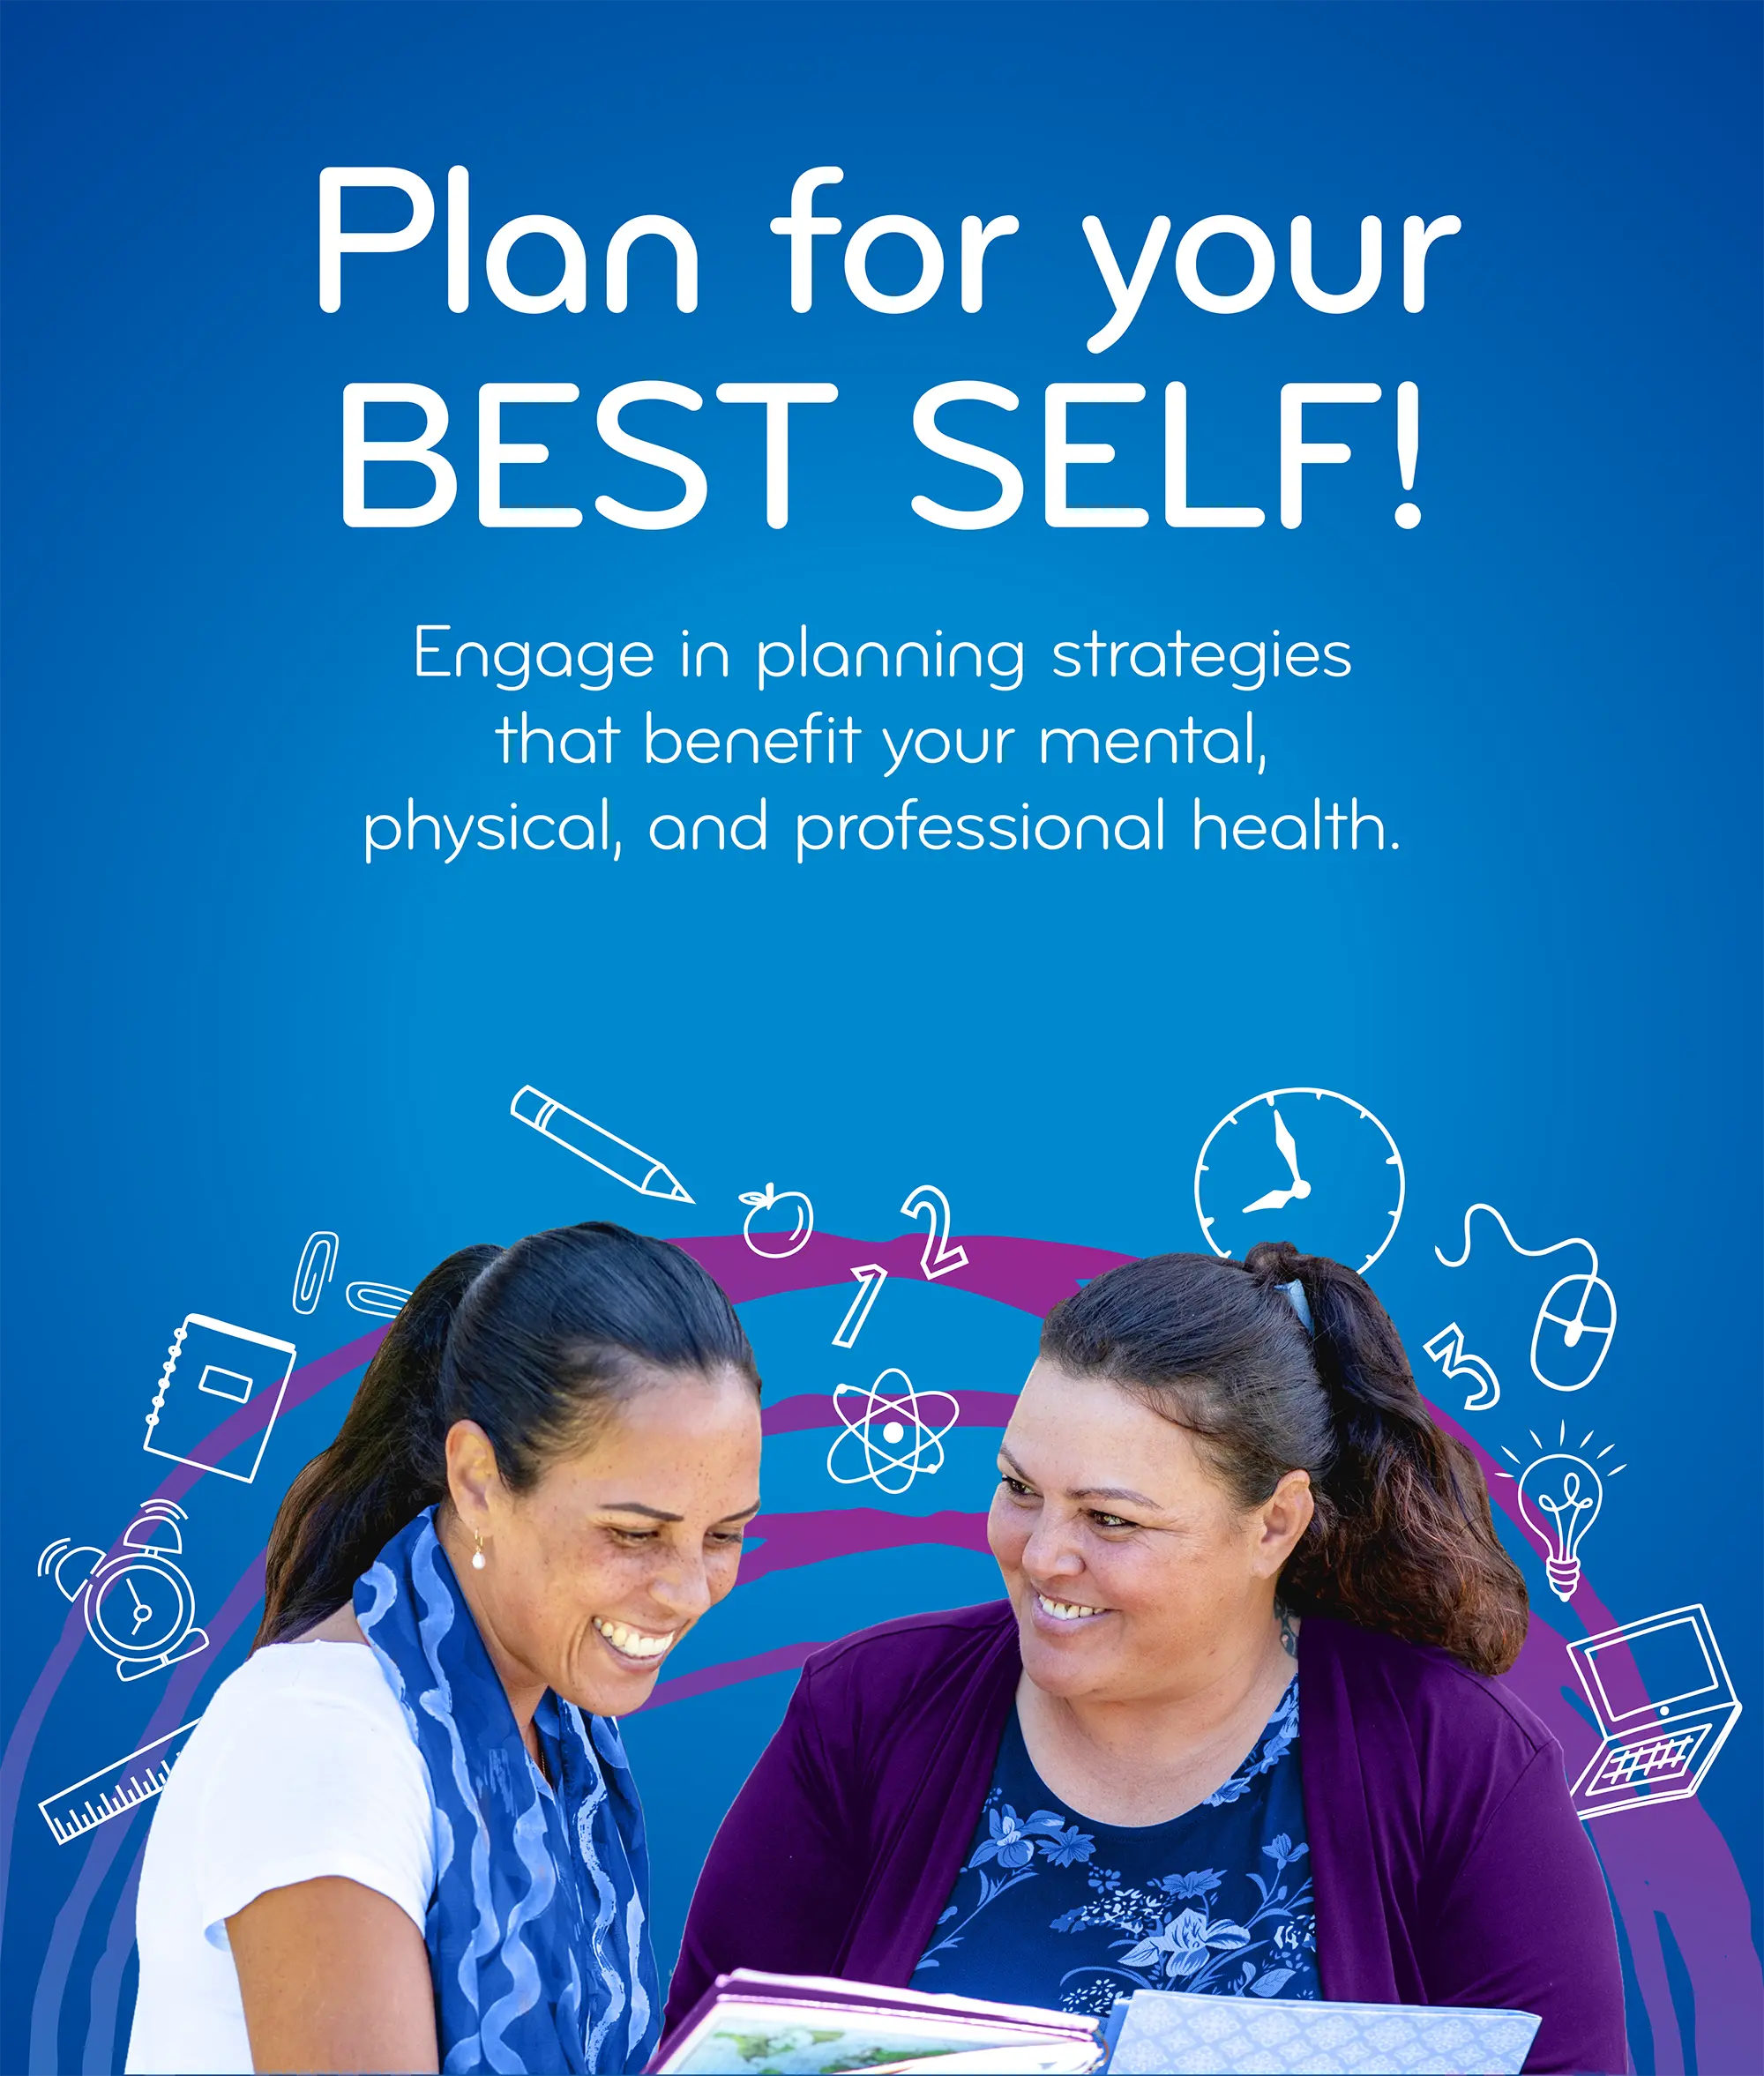 Plan for your BEST SELF!